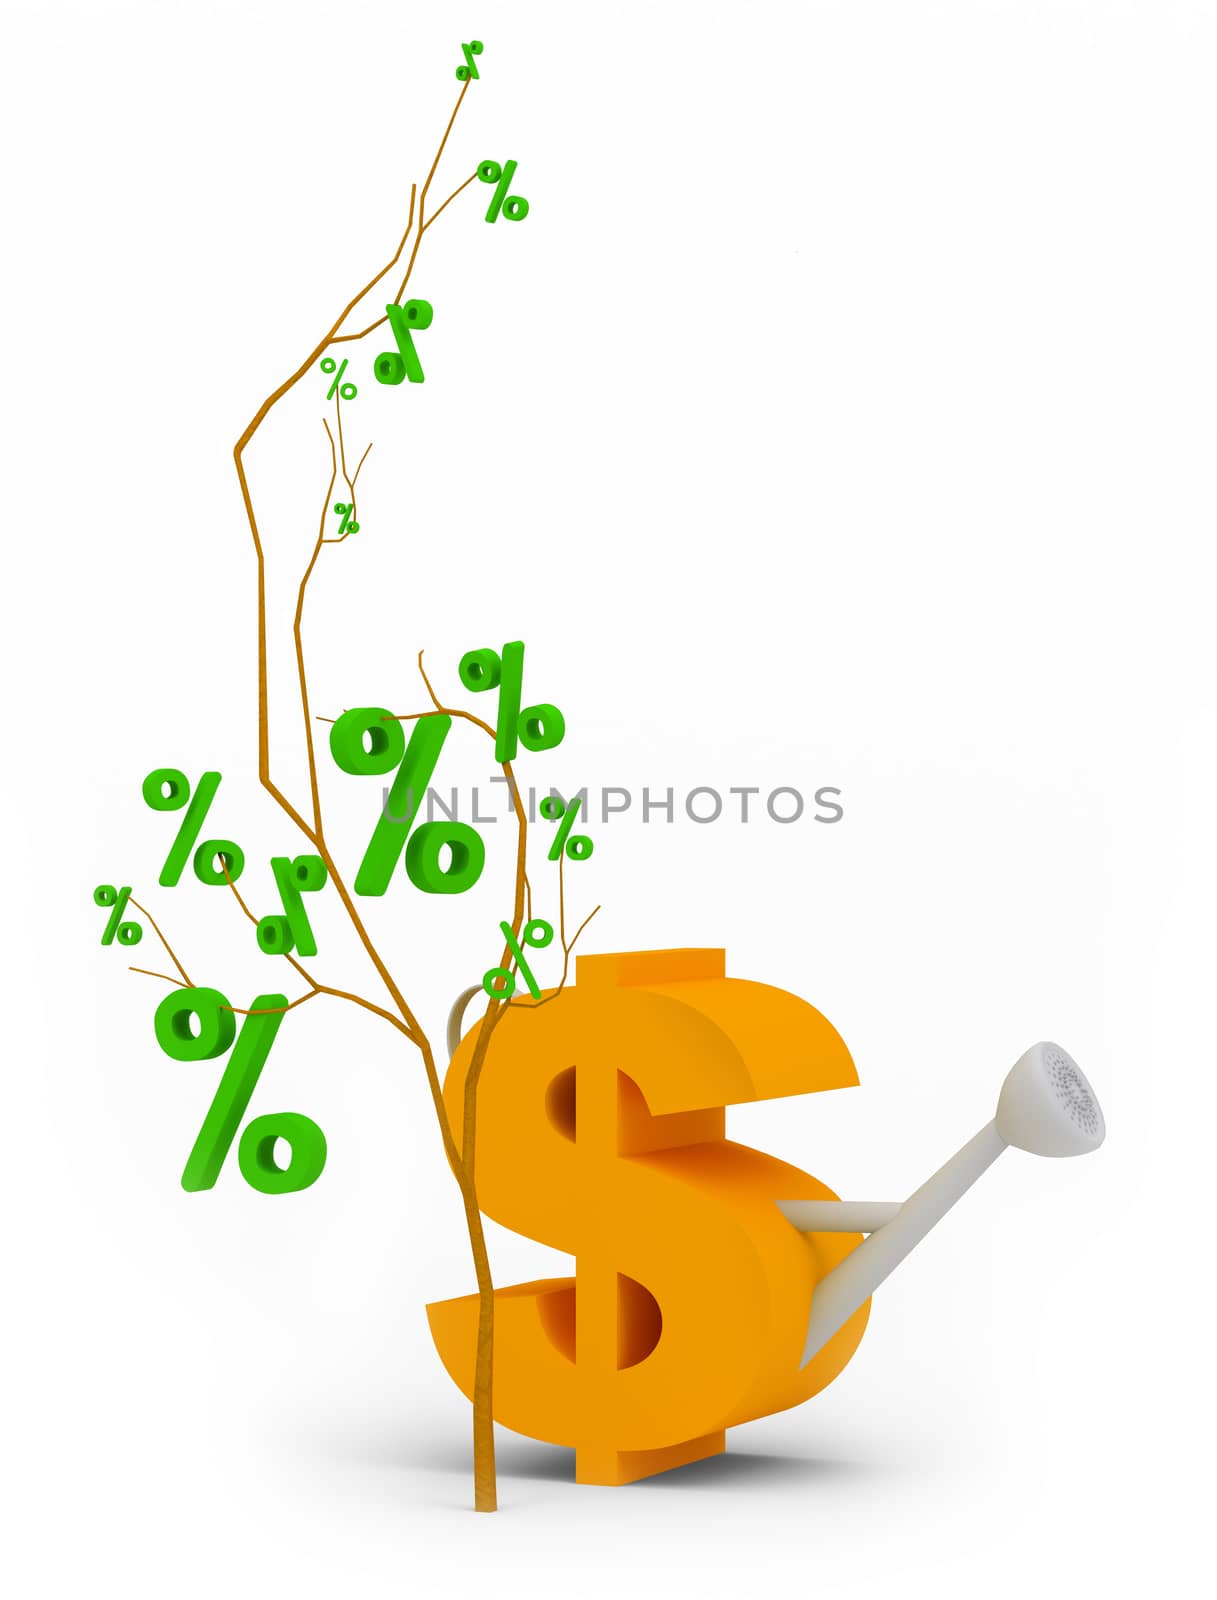 Tree of percent near to a watering can on the isolated white background